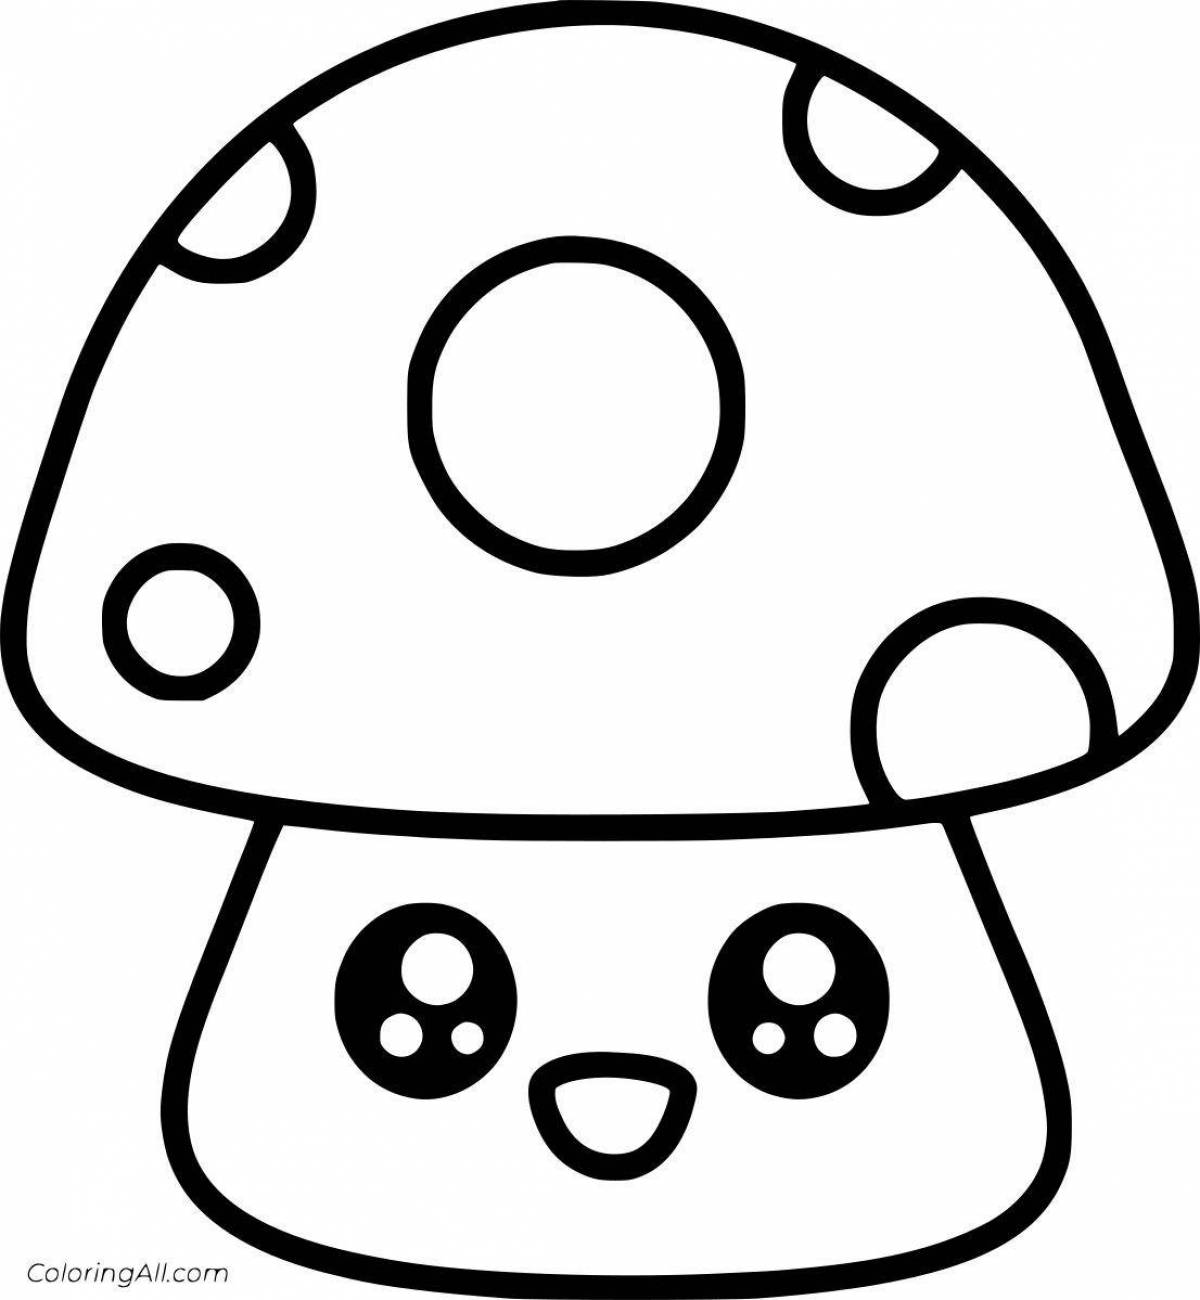 Coloring mushrooms for children 3-4 years old